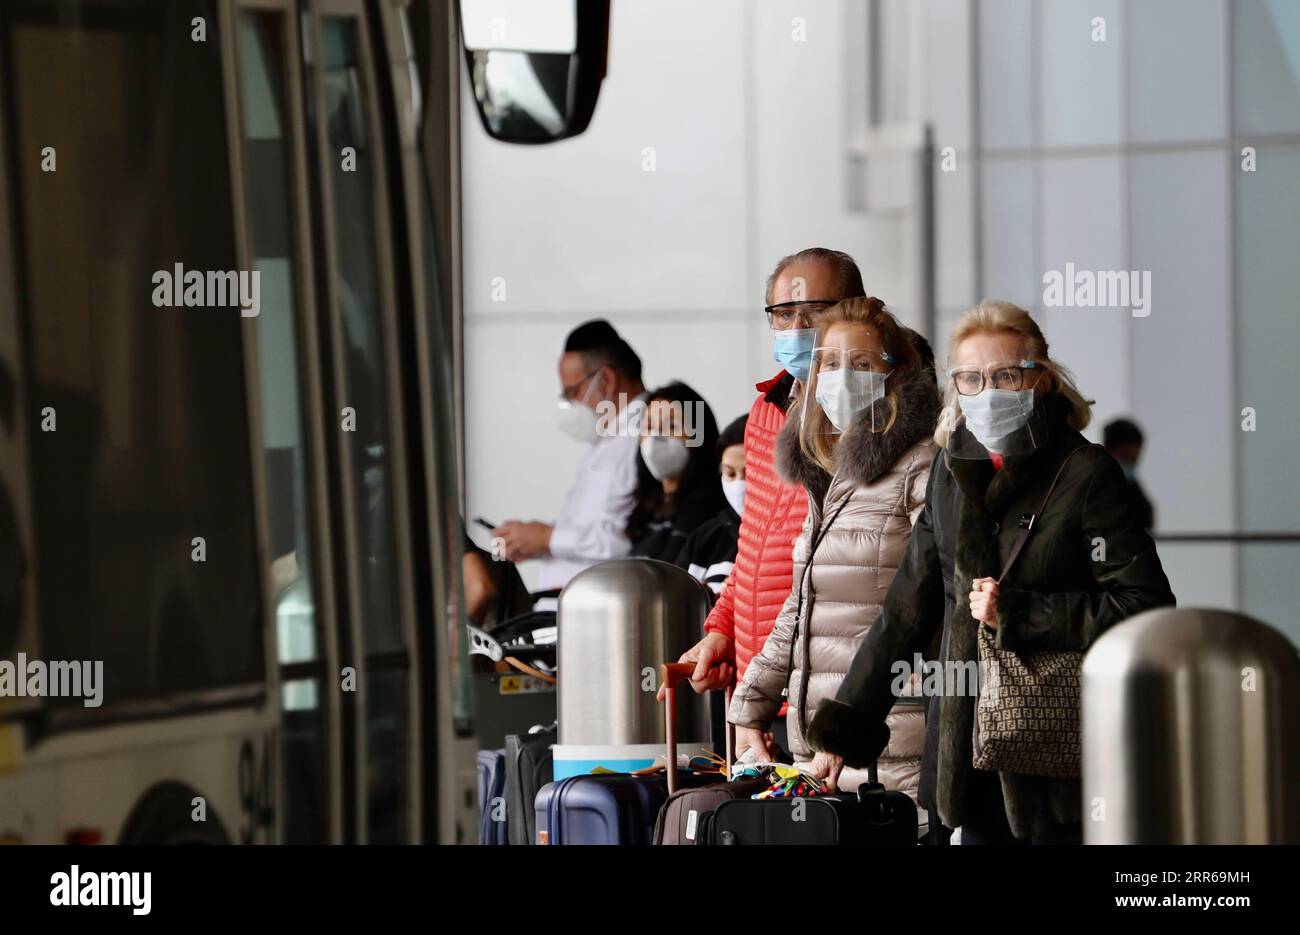 210202 -- LOS ANGELES, Feb. 2, 2021  -- Travelers with face masks wait for public transportation services at the International Airport in Los Angeles, California, the United States, on Feb. 1, 2021. Beginning Tuesday, Americans are required to wear face masks while traveling on domestic public transport as part of a national strategy to curb the spread of COVID-19. The rule, issued by the U.S. Centers for Disease Control and Prevention CDC, applies to passengers on airplanes, trains, subways, buses, taxis and ride-shares. And it extends to waiting areas such as airports, train platforms and su Stock Photo